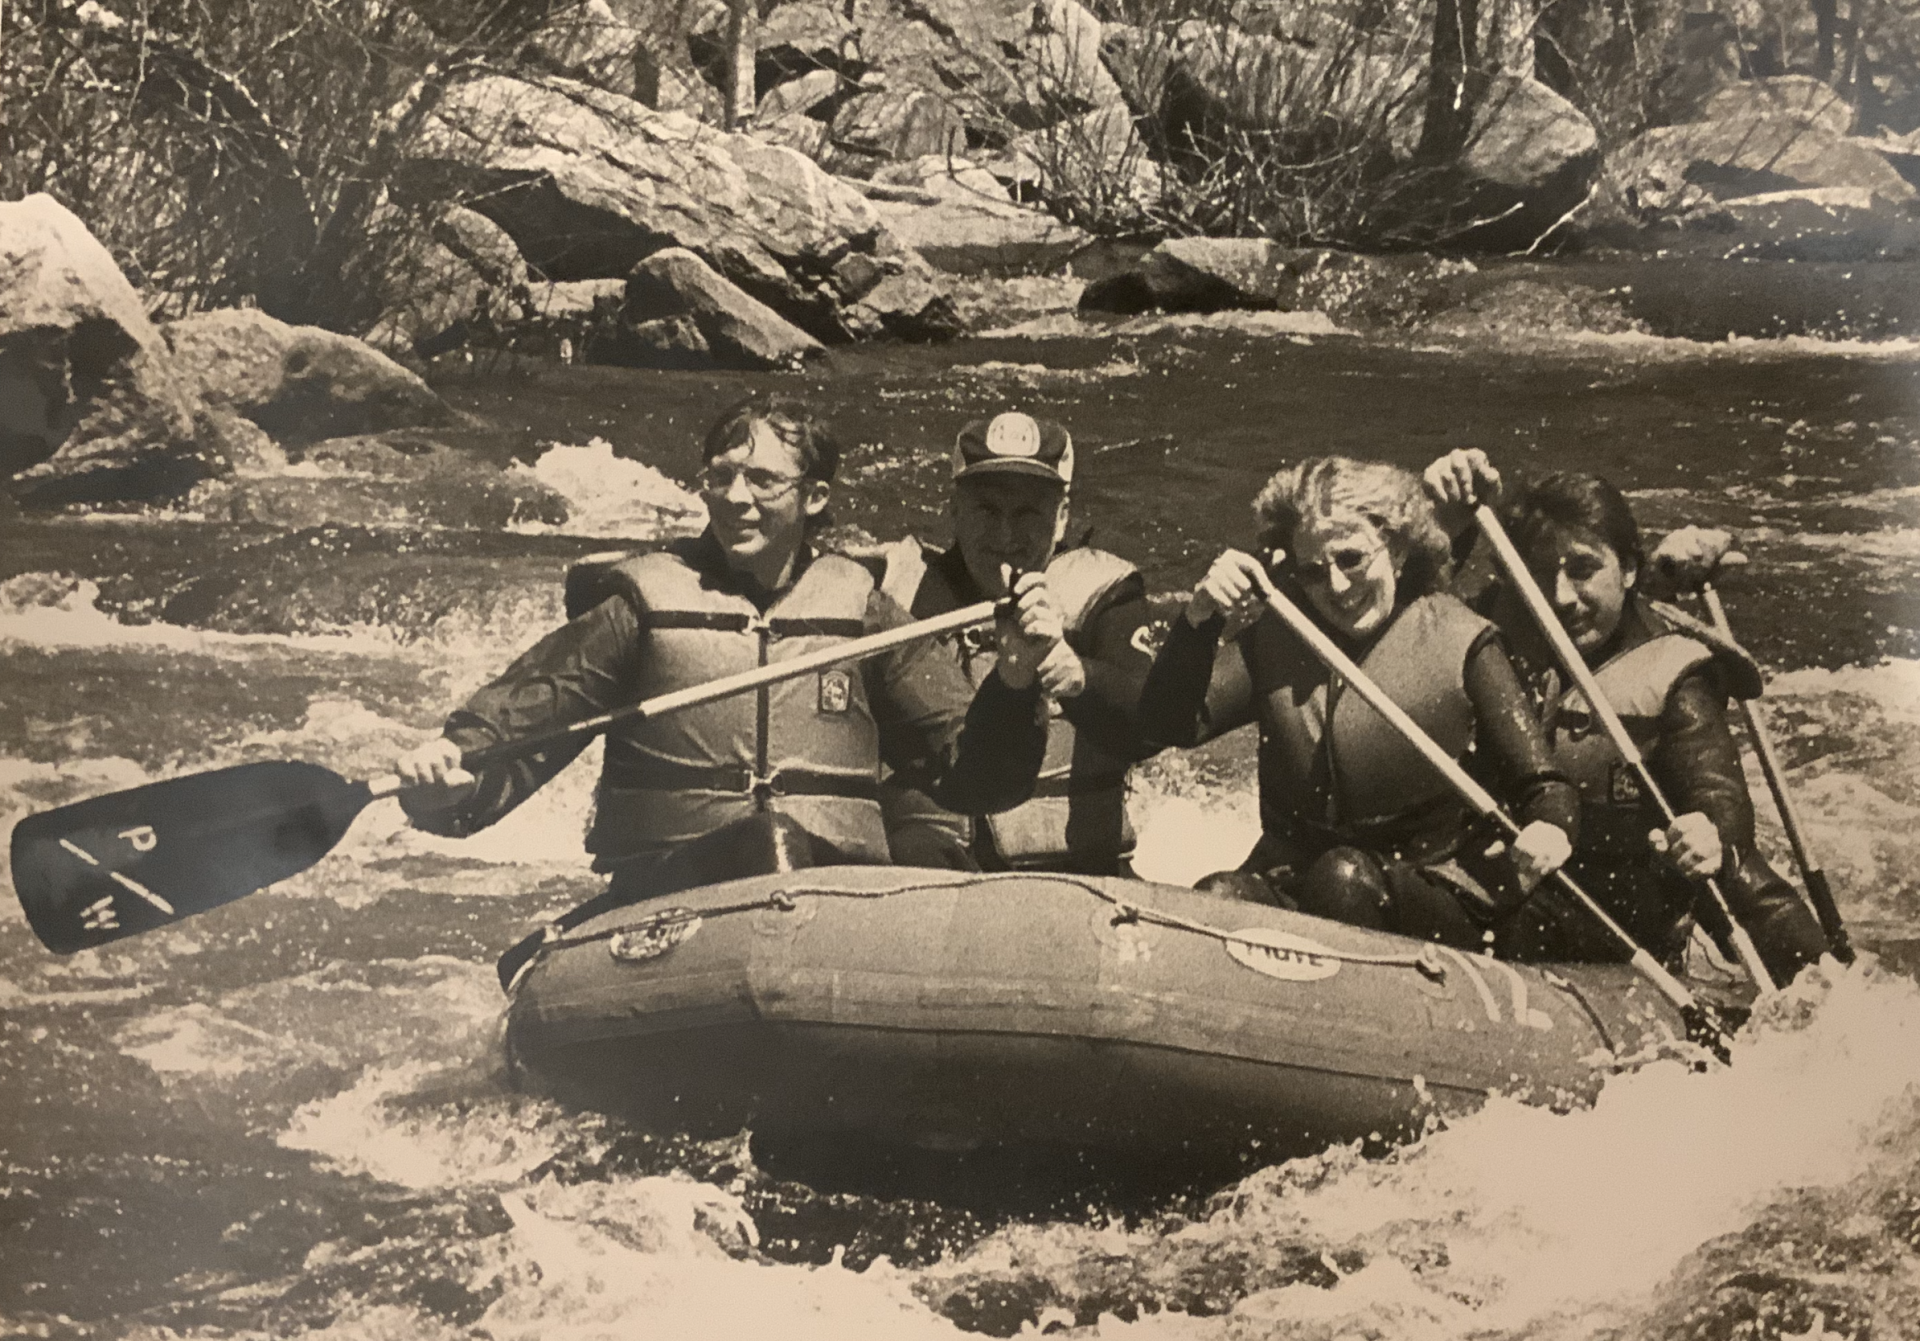 This shows Sharon and I Rafting. Just one of many things she got me to do.